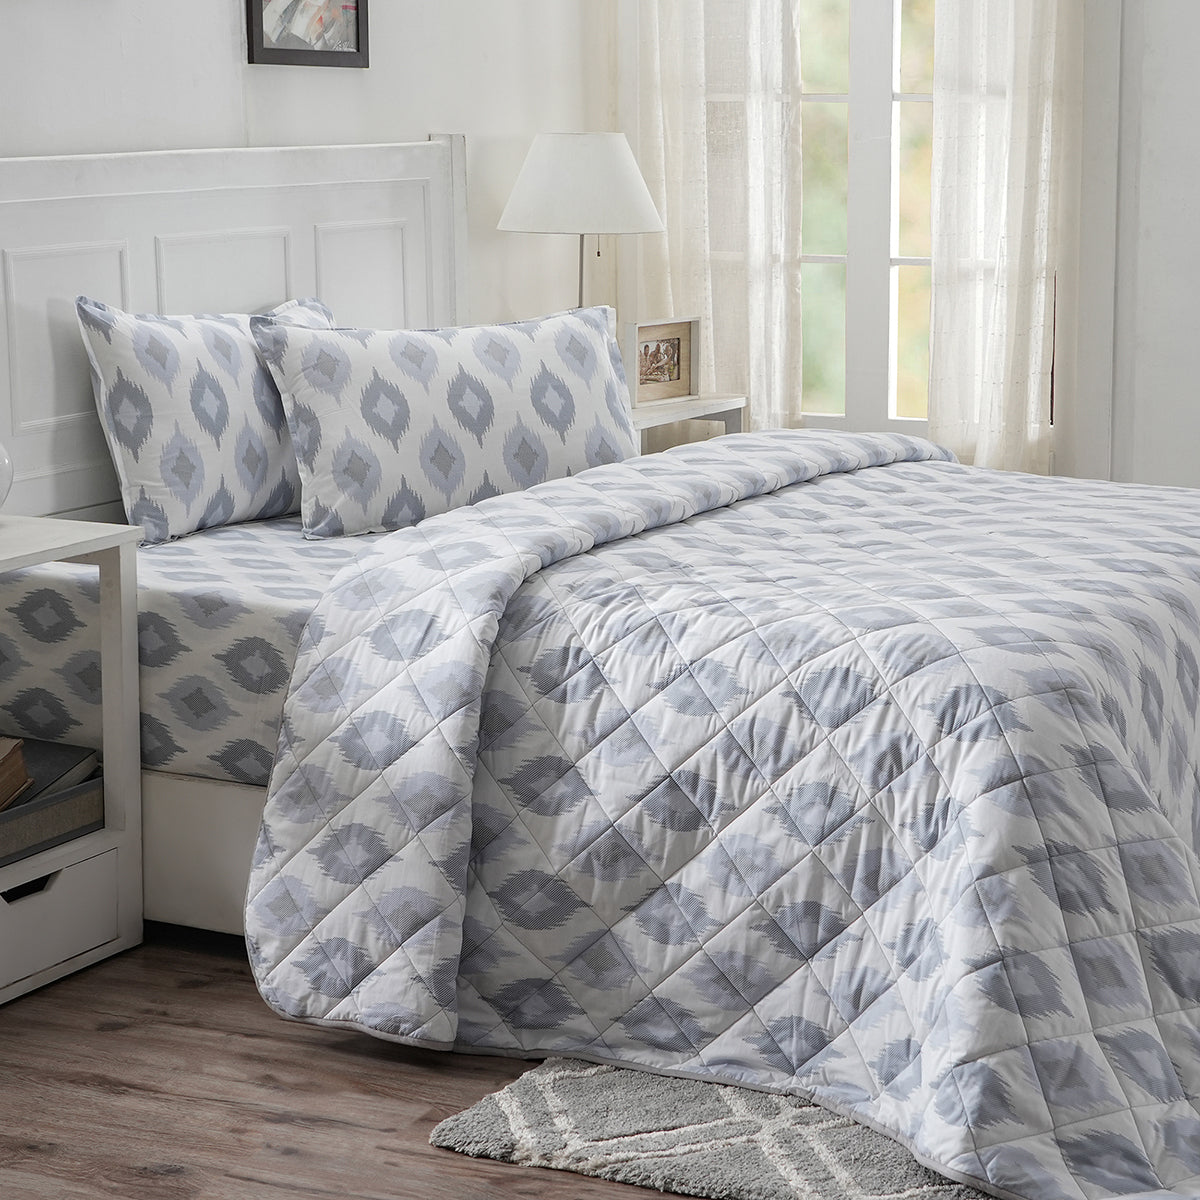 Optimist Bloom Lucasta 4PC Quilt/Quilted Bed Cover Set